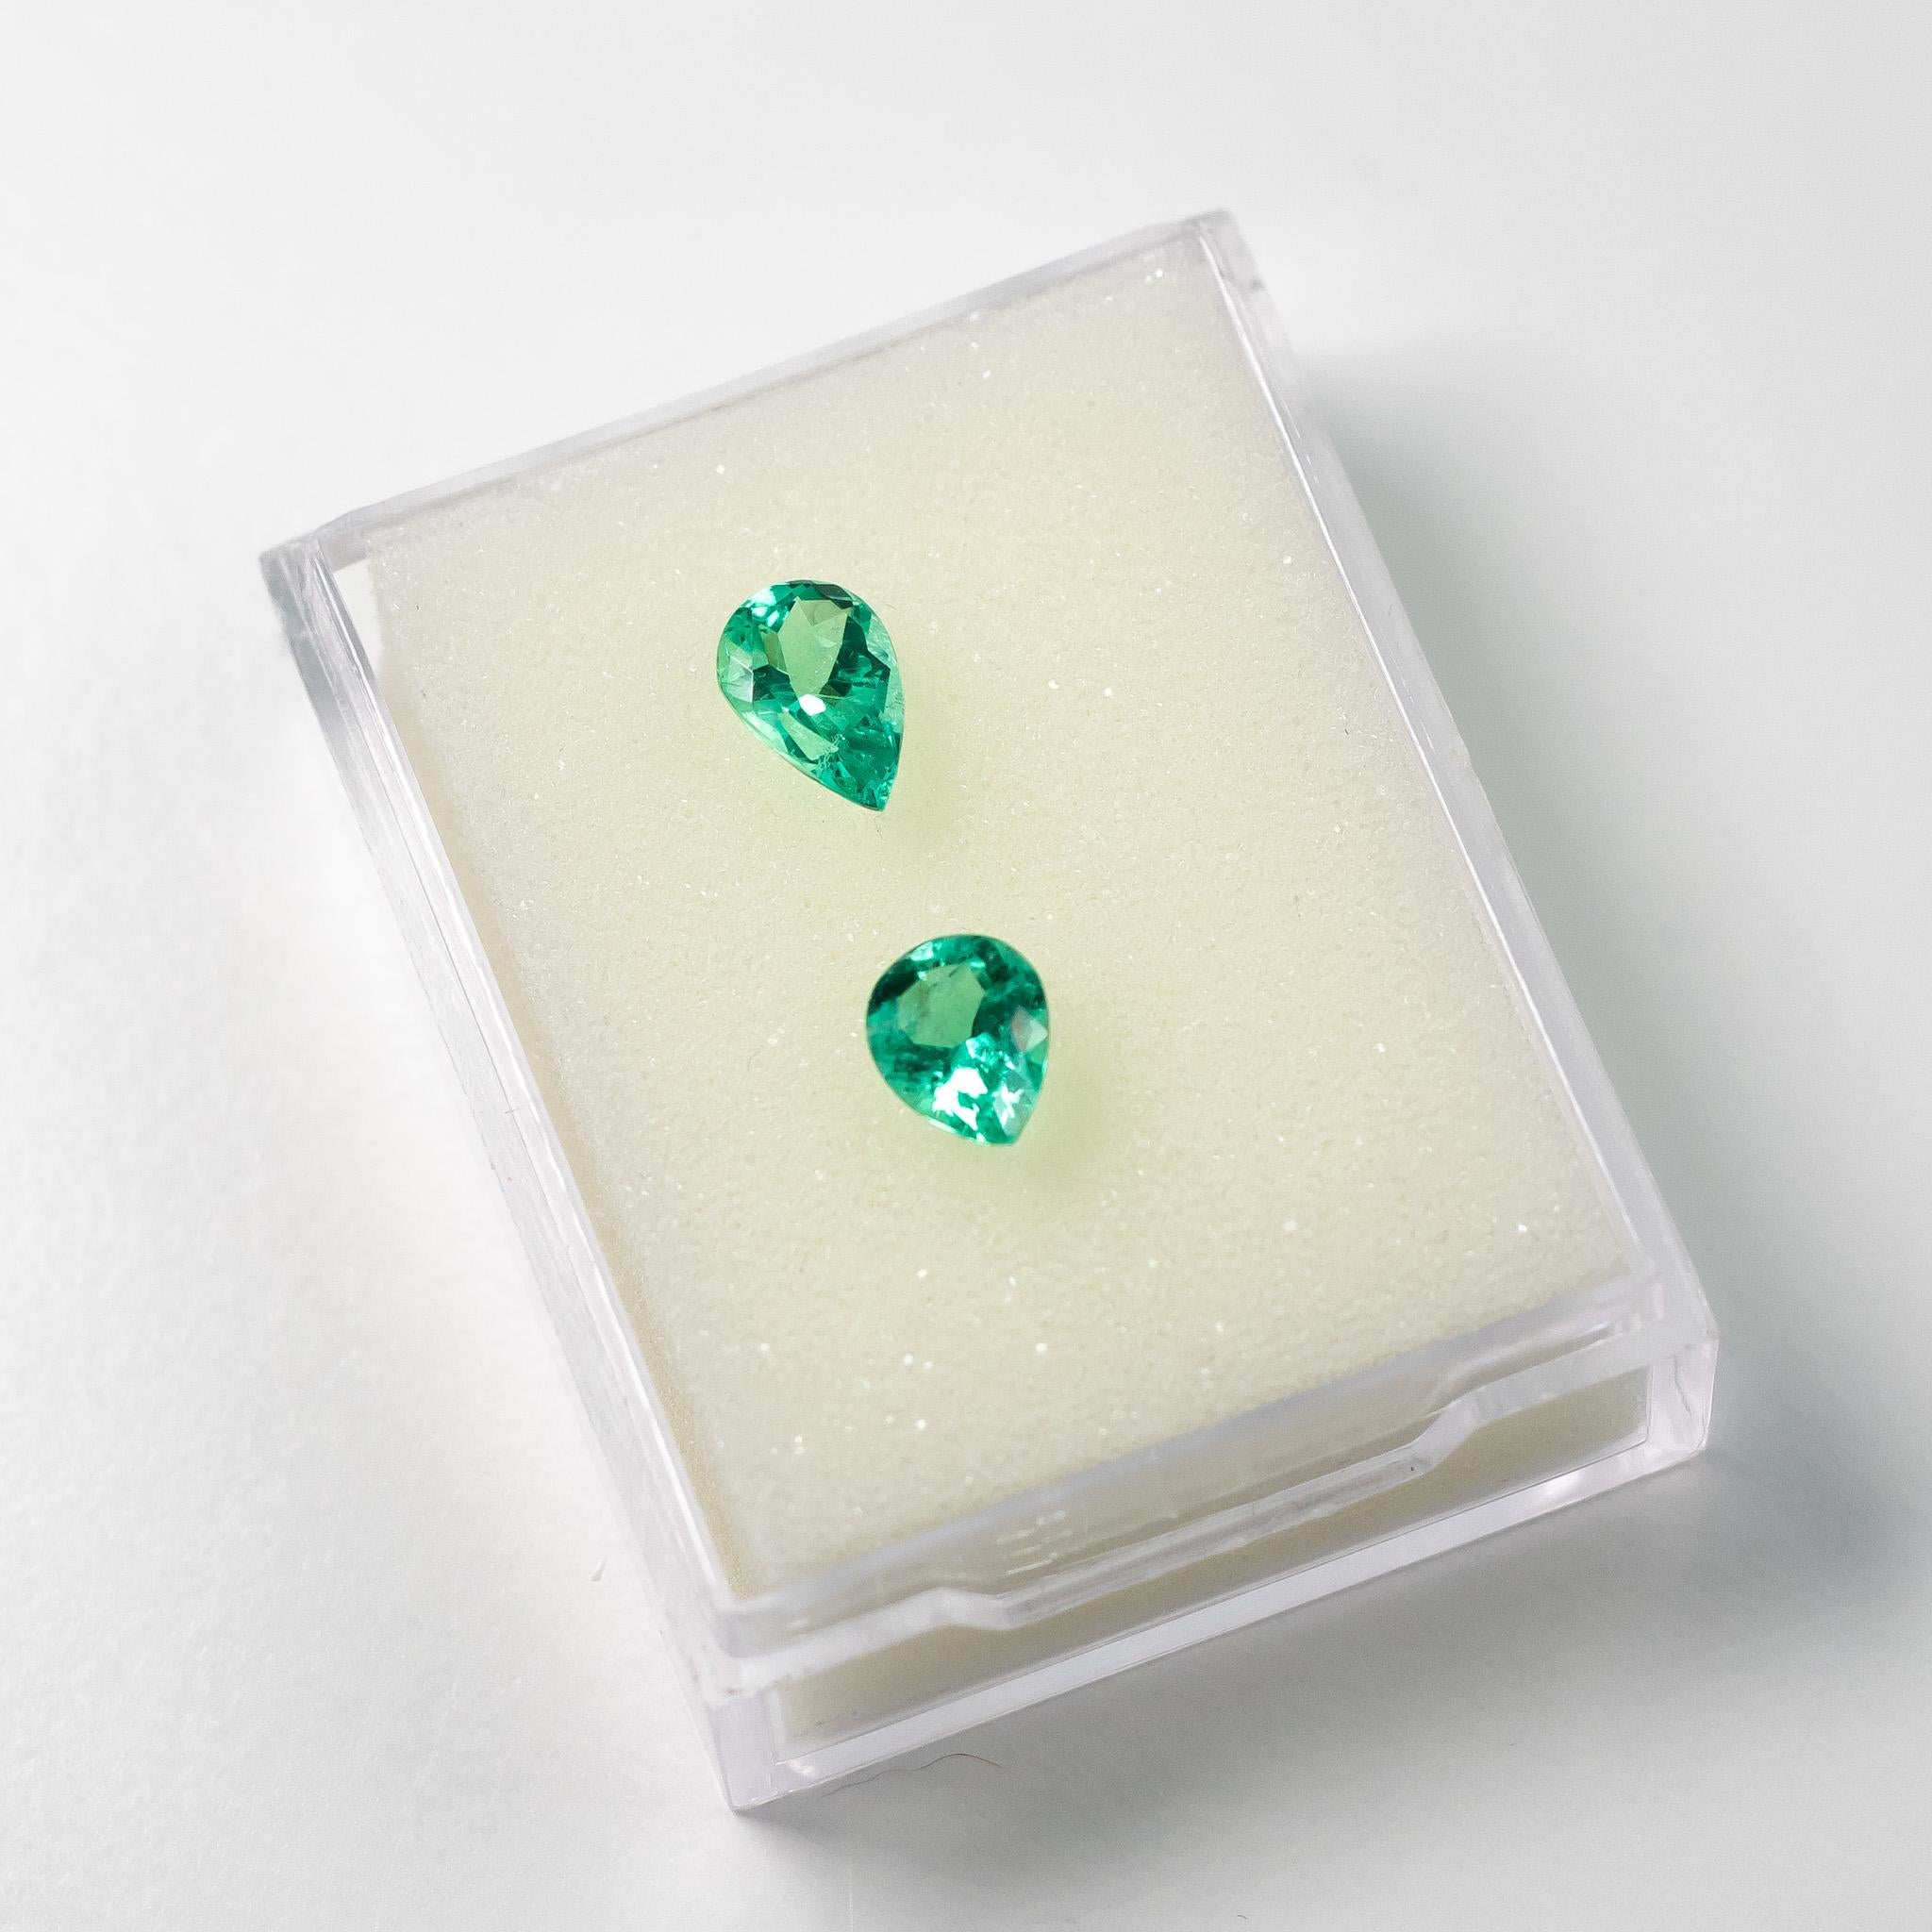 Stunning natural Colombian emerald pear cut pair. 

Both emeralds have amazing clarity and lustre, these stones absolutely glow! If set in yellow gold, they would be divine.

The emerald pair would make a beautiful toi et moi ring, an interesting